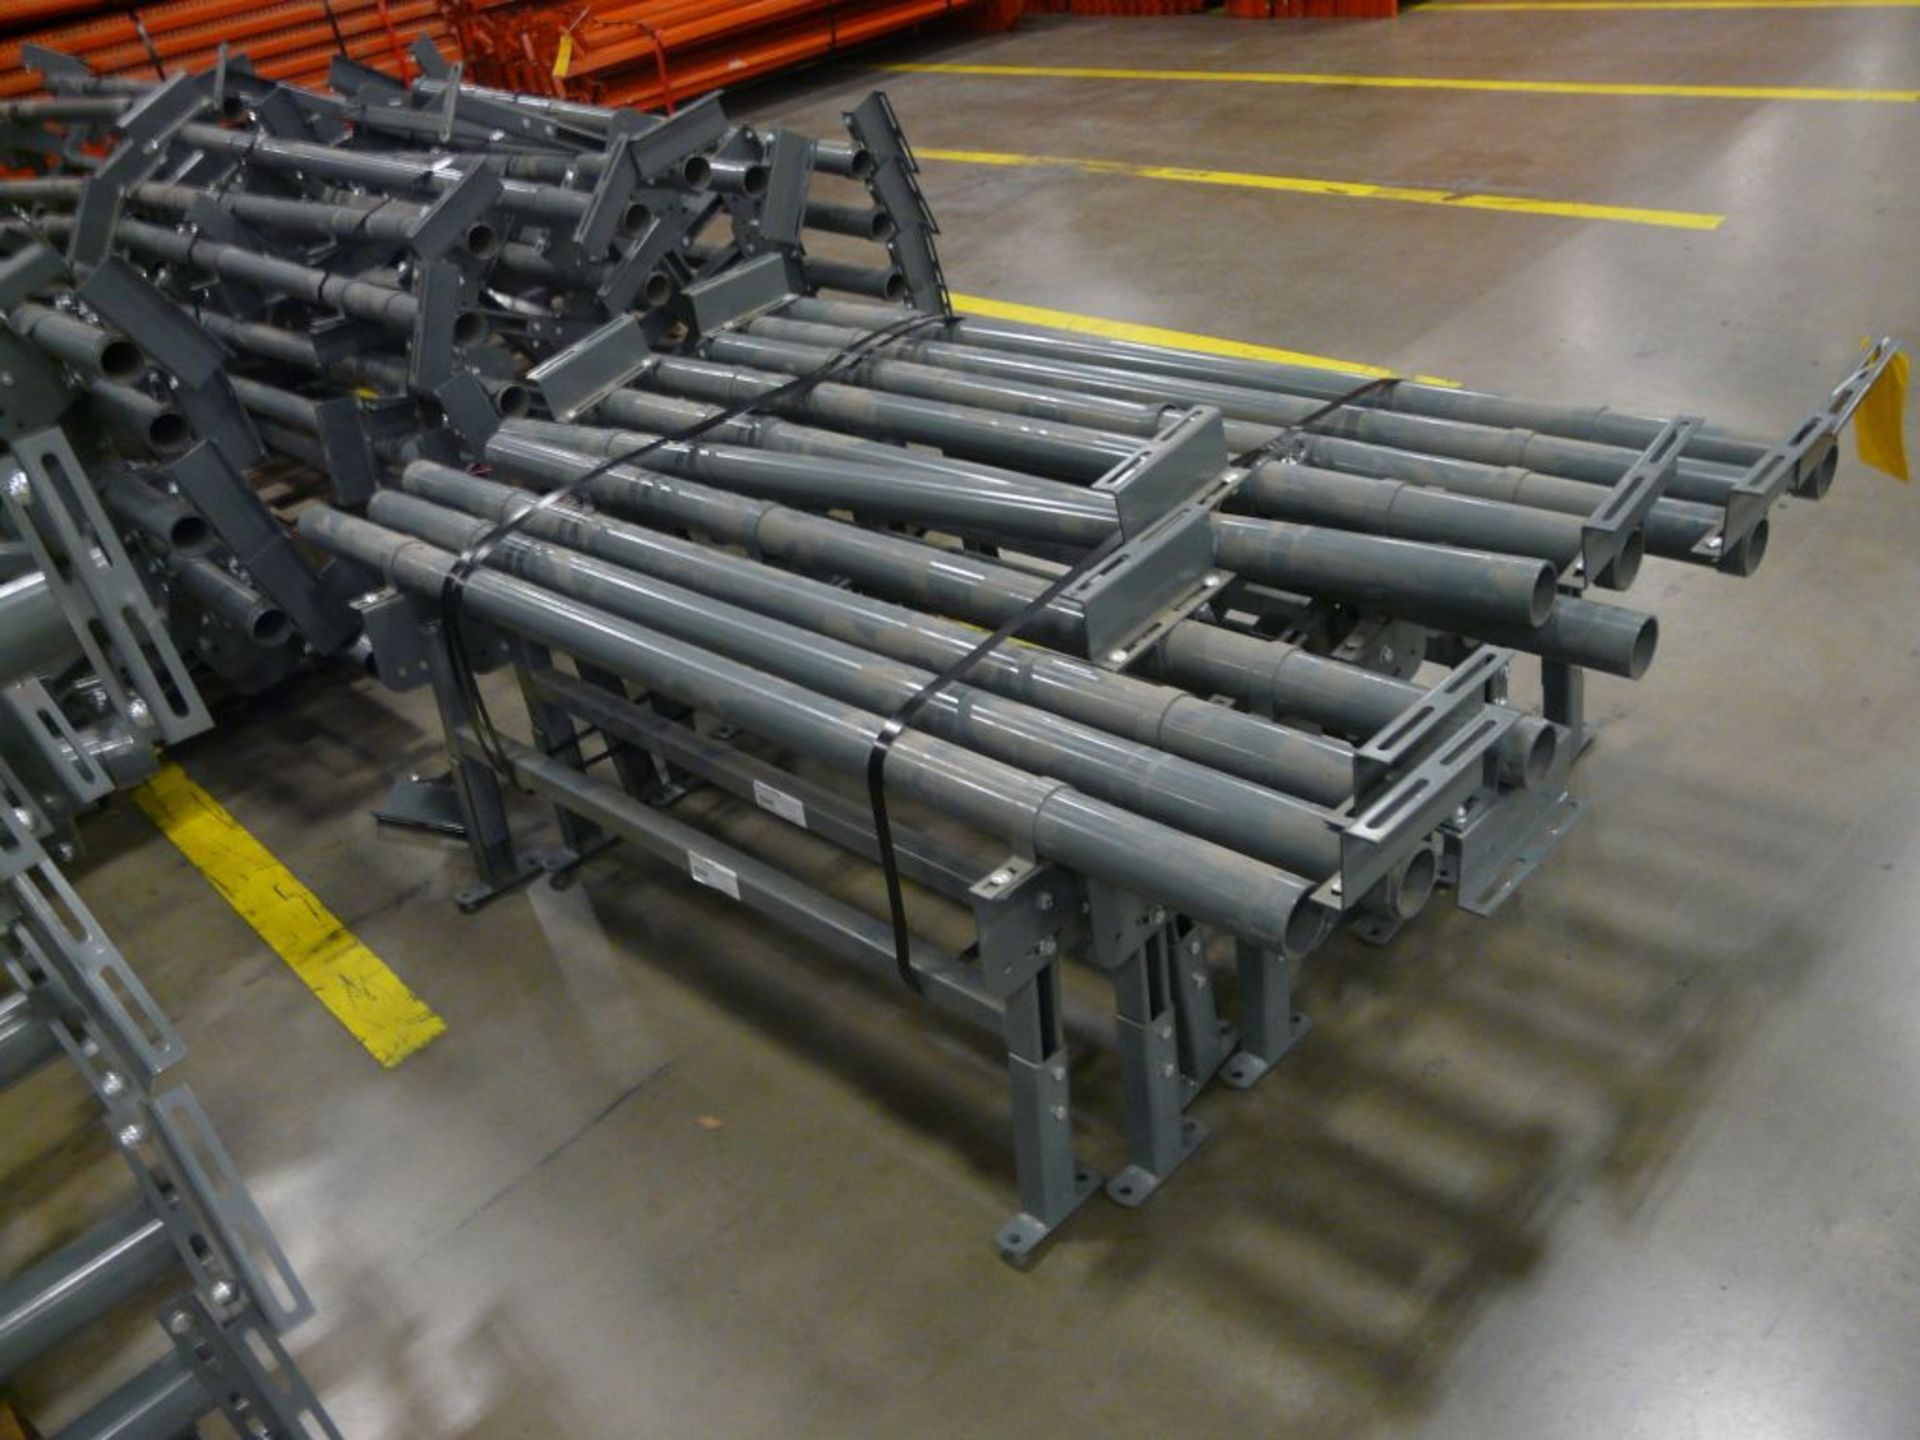 Lot of (10) USA Floor Supports - Brace: 71"L; Stand: 44"L x 19"H; Tag: 223864 - $30 Lot Loading Fee